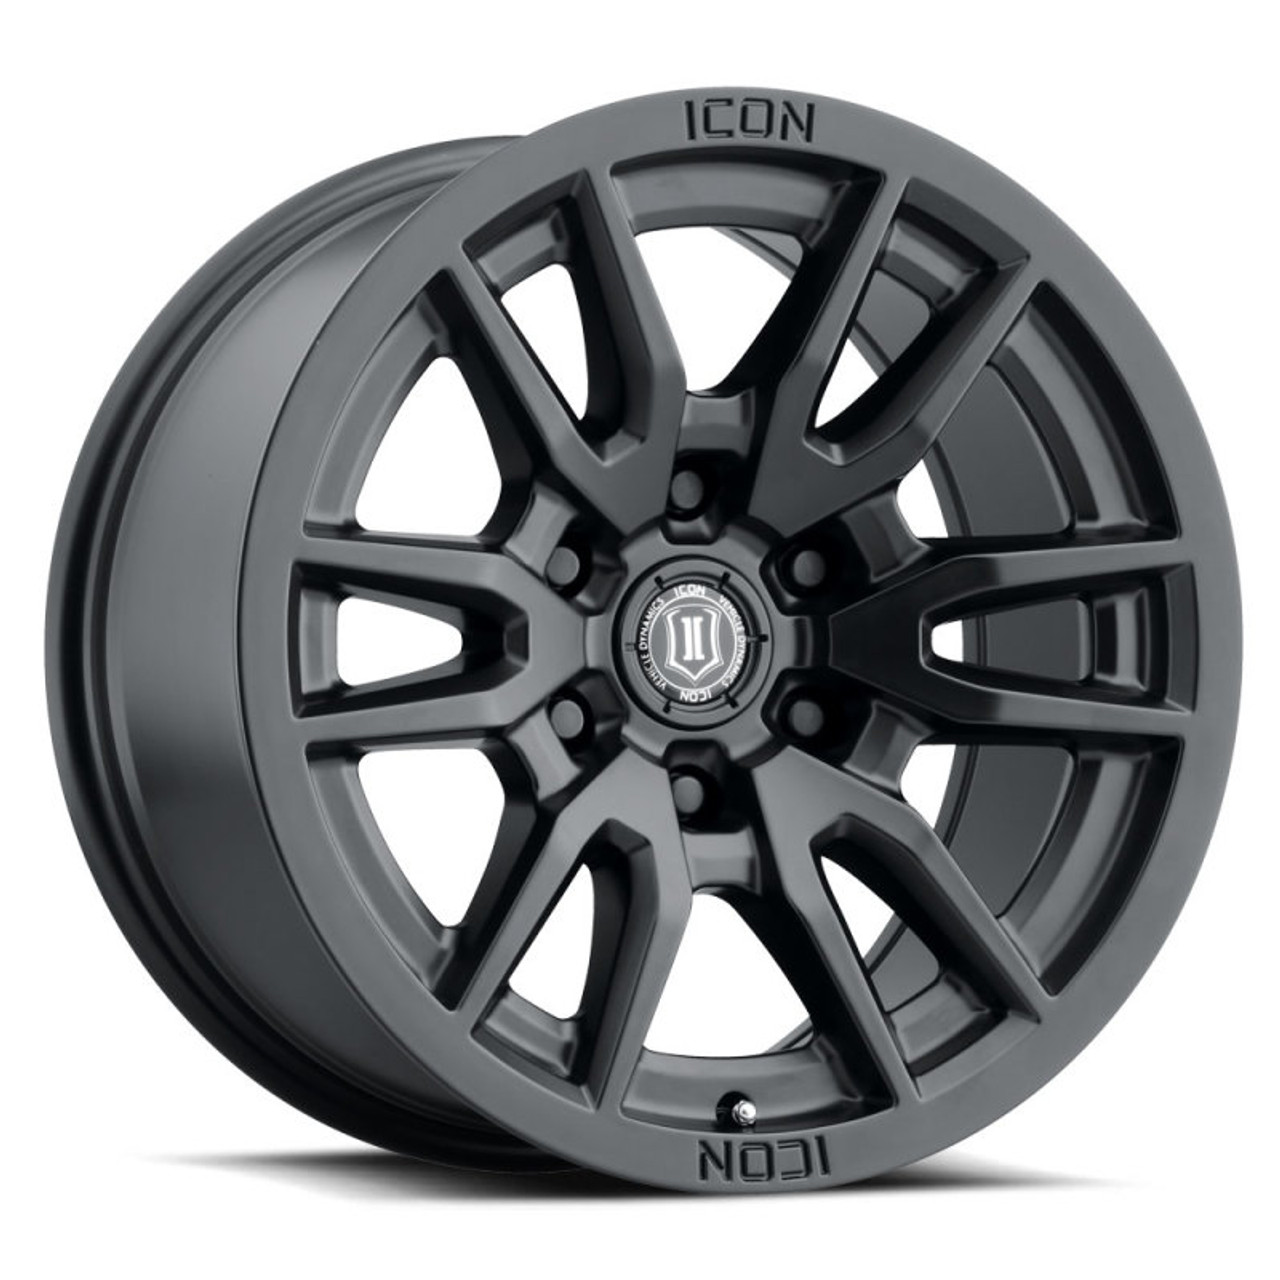 ICON Vector 6 17x8.5 6x5.5 25mm Offset 5.75in BS 95.1mm Bore Satin Black Wheel - 2417859057SB Photo - Primary